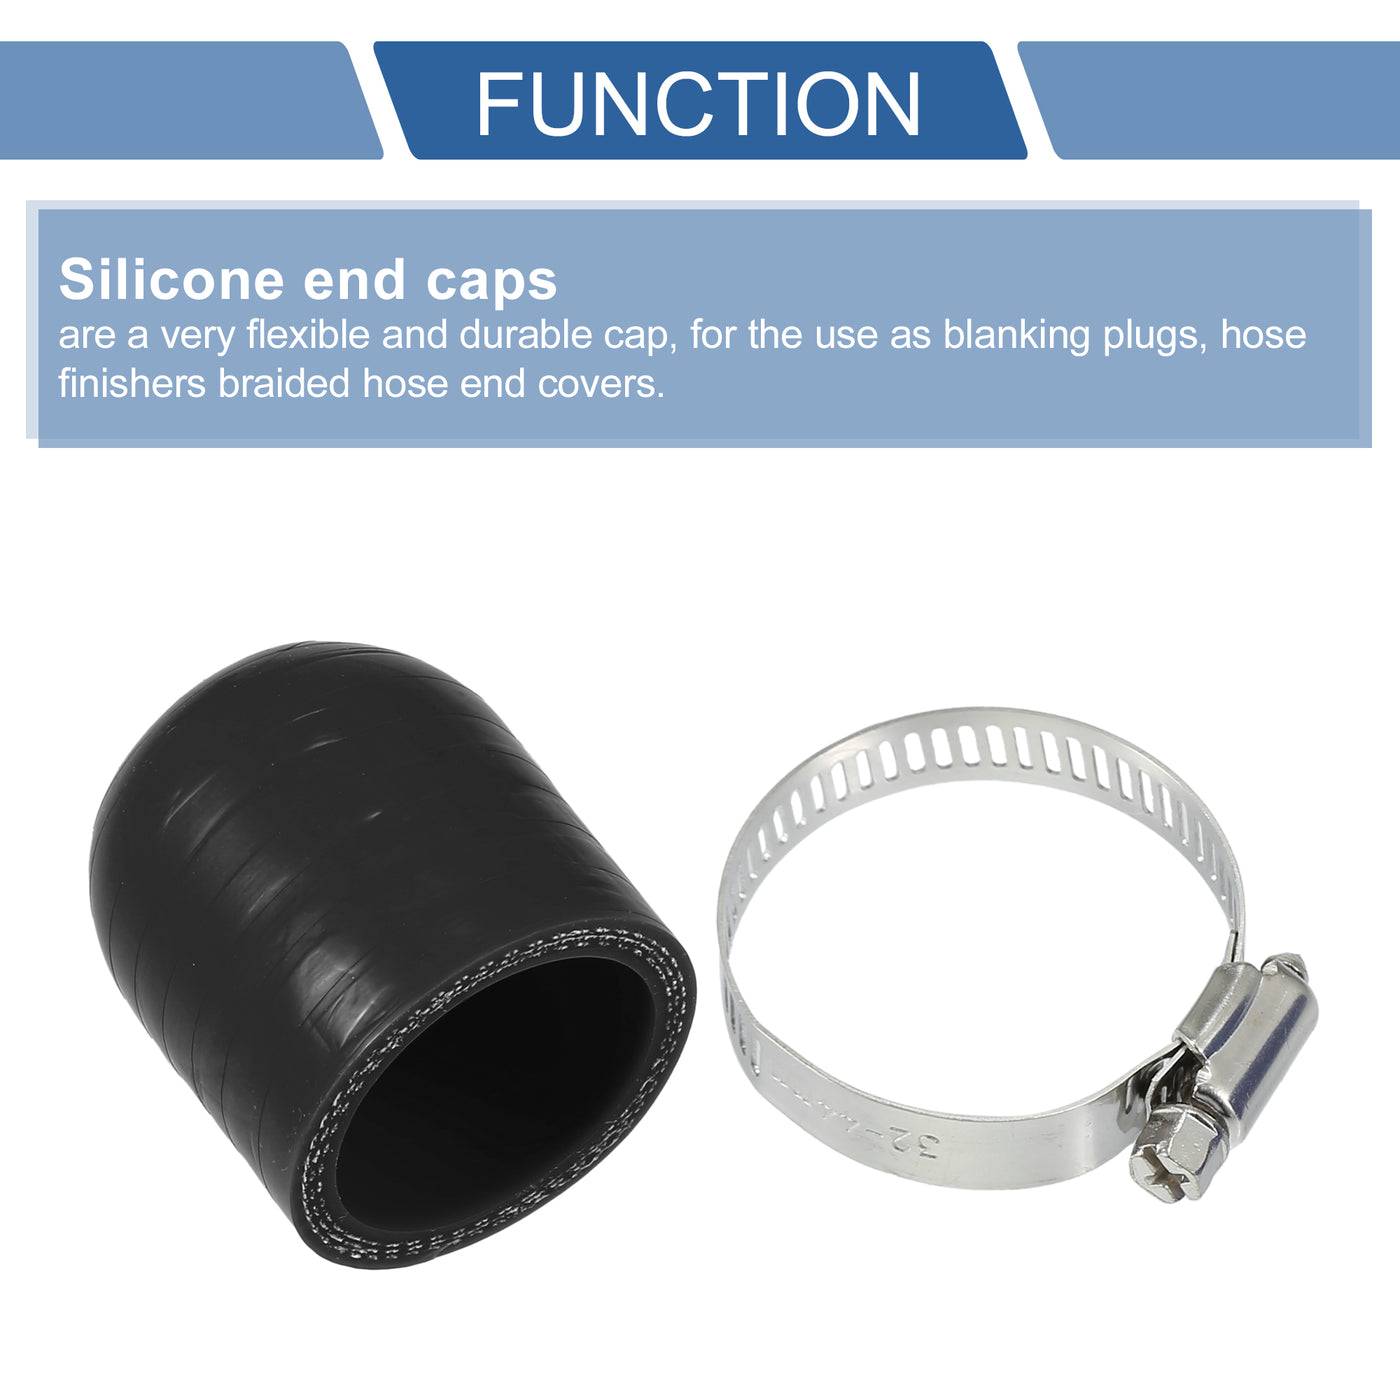 X AUTOHAUX 1 Set 30mm Length 32mm/1.26" ID Black Car Silicone Rubber Hose End Cap with Clamps Silicone Reinforced Blanking Cap for Bypass Tube Universal